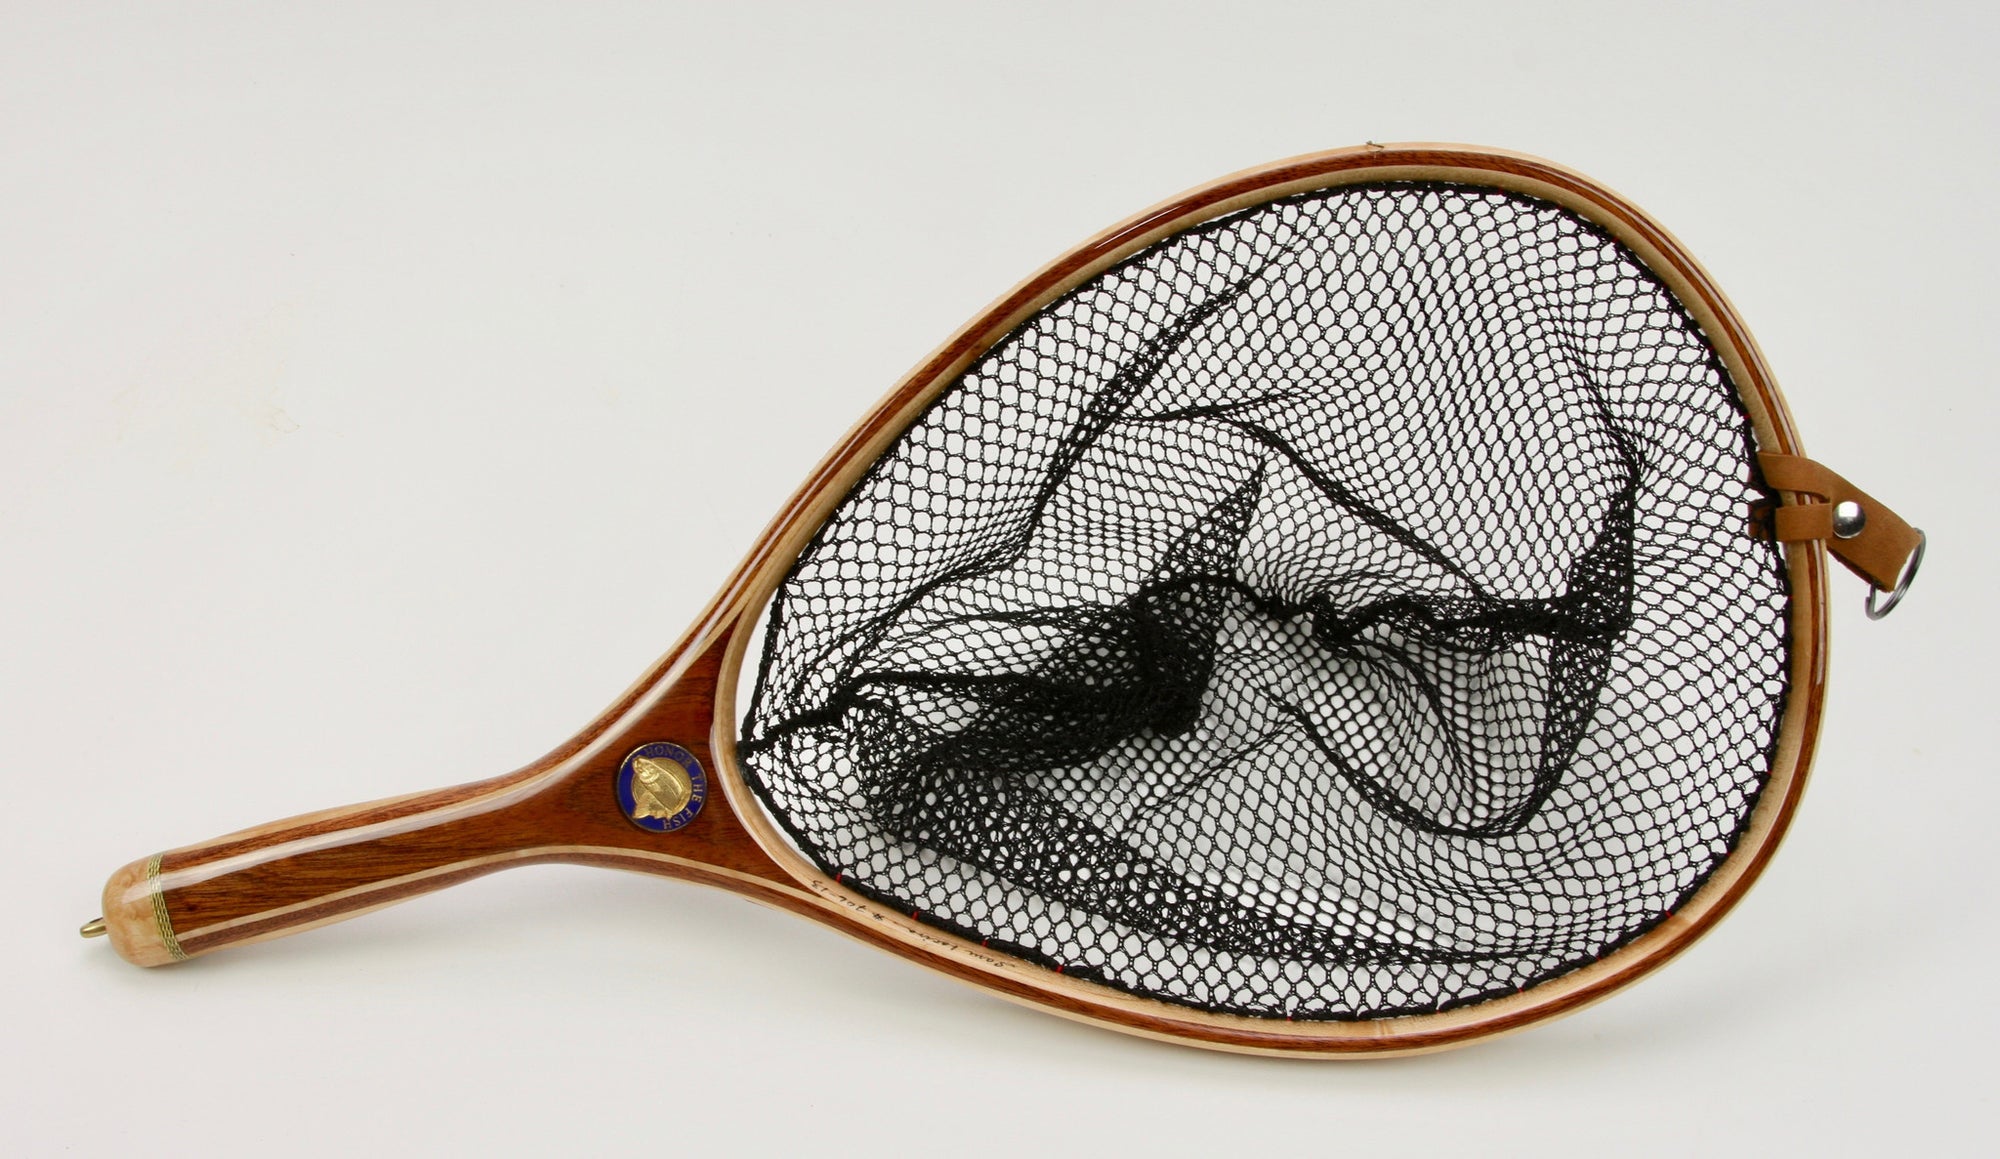 Medium sized landing net with Uniquely carved cherry handle - Nets